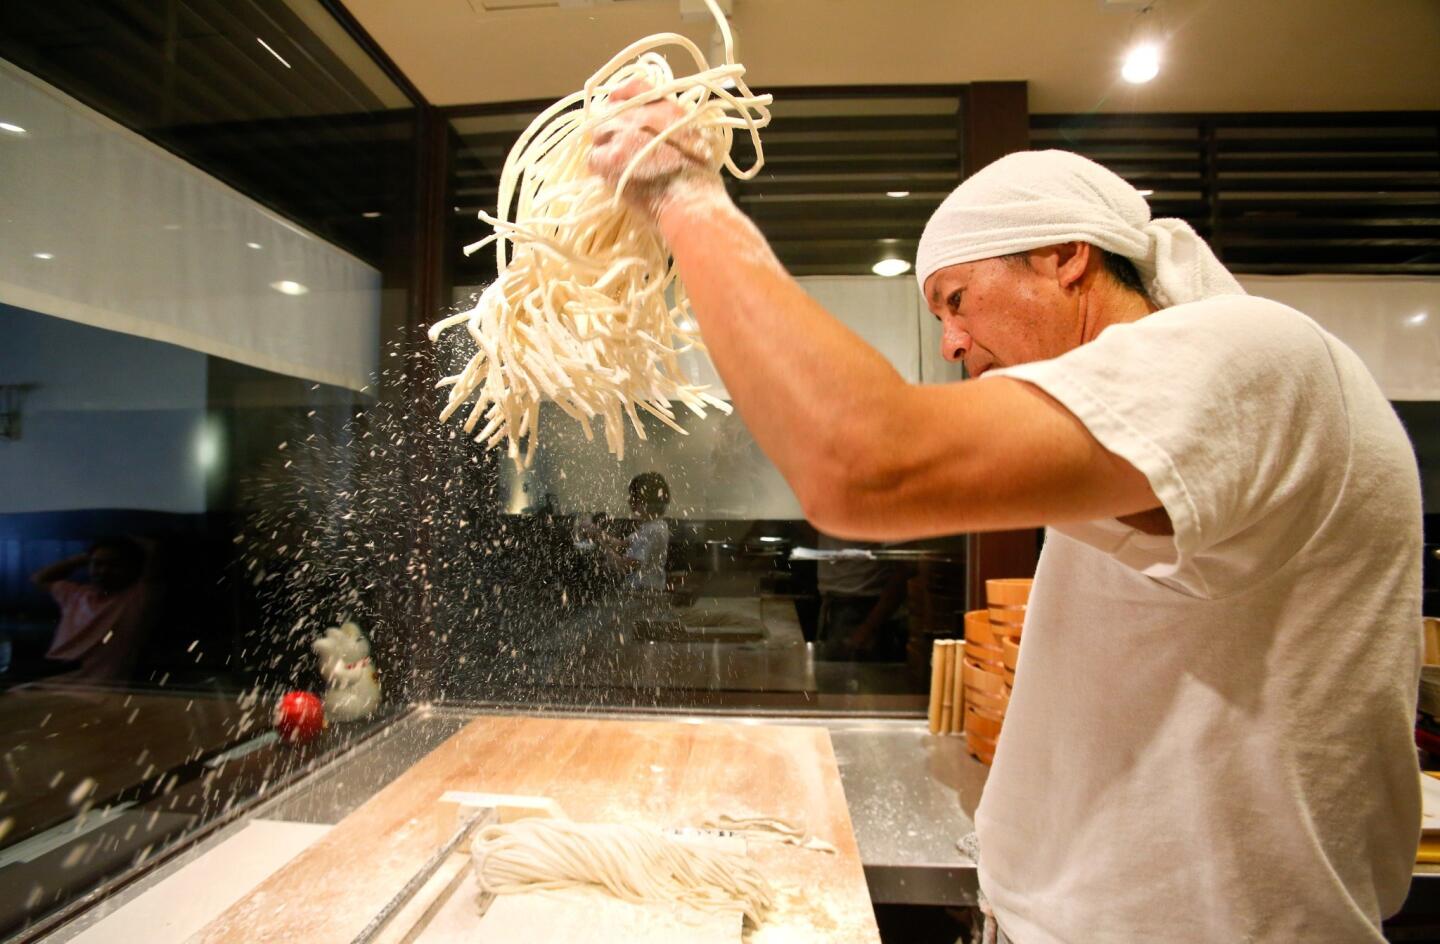 Customers can watch udon noodles being made as they dine at Marugame Monzo.